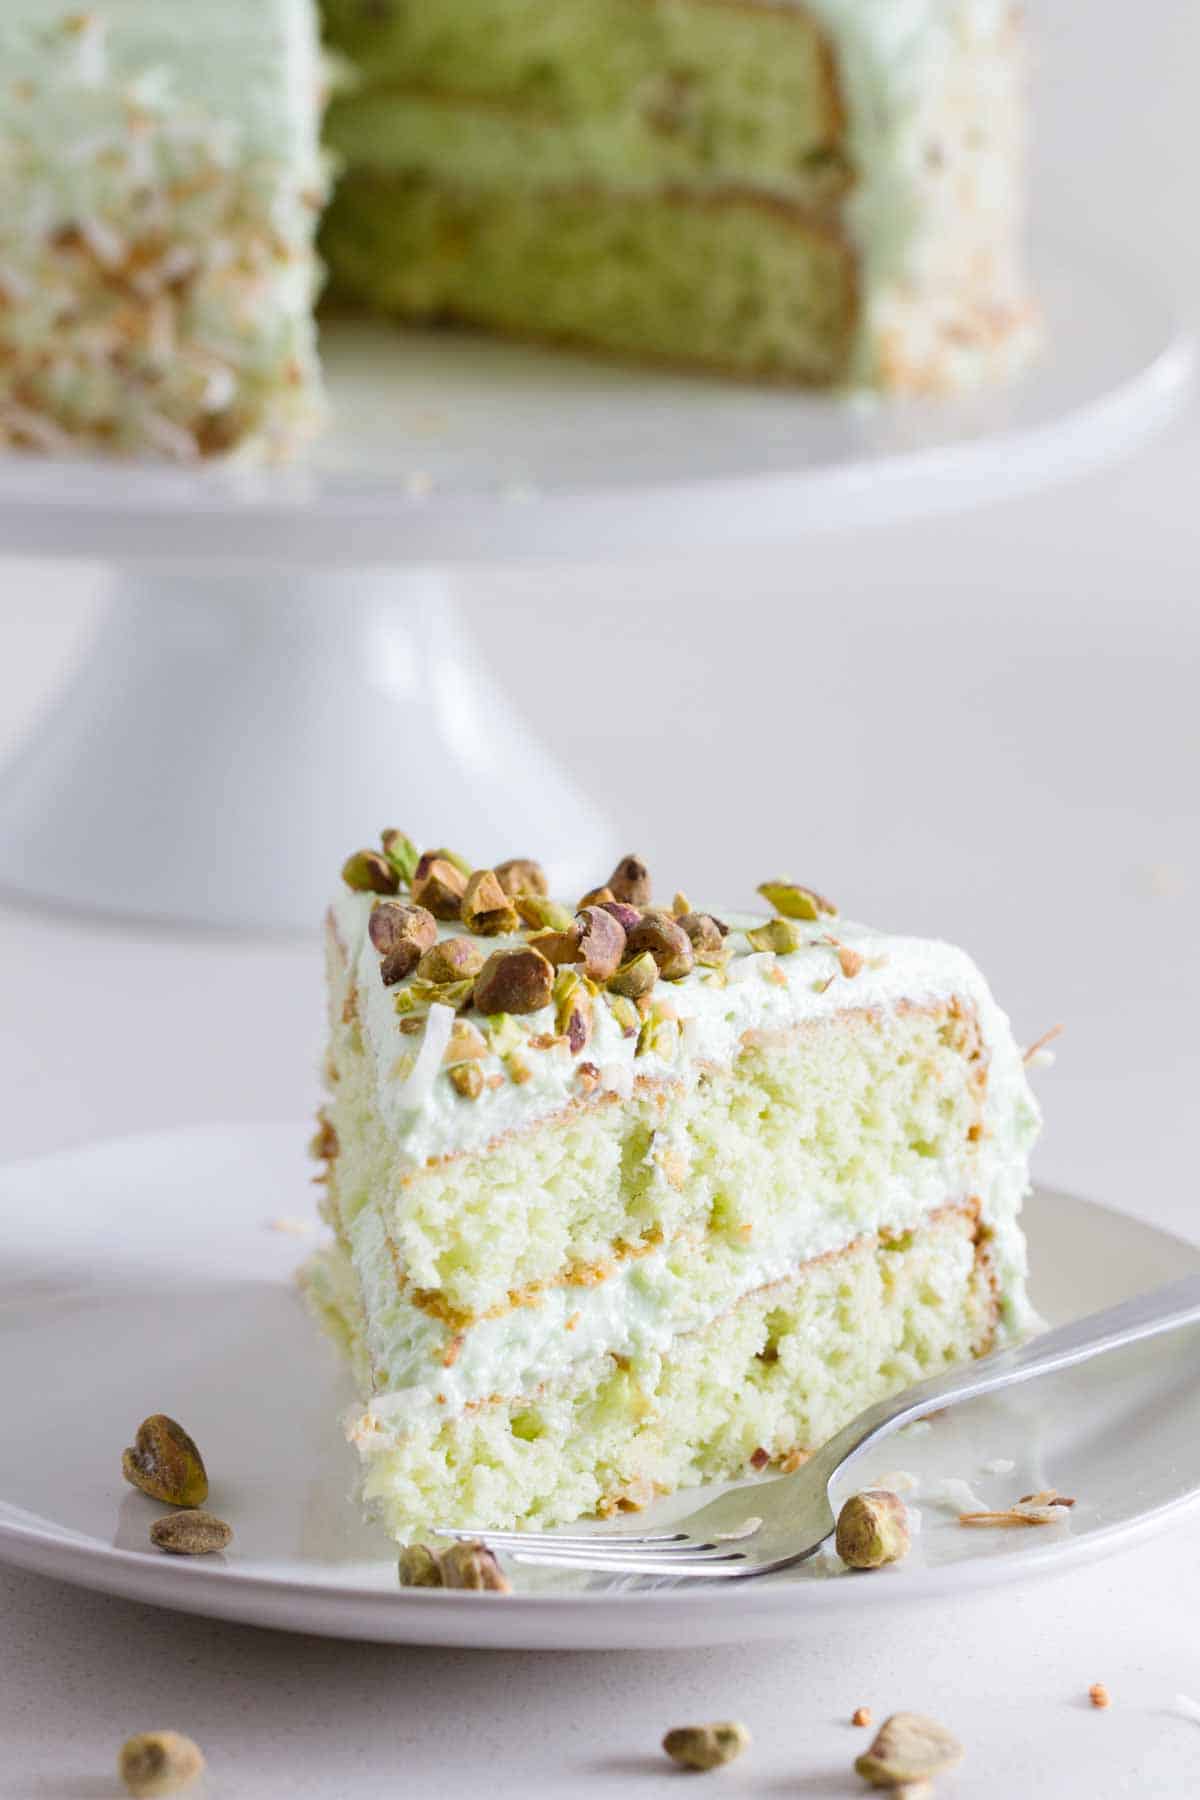 Slice of Pistachio Pudding Cake on a plate.